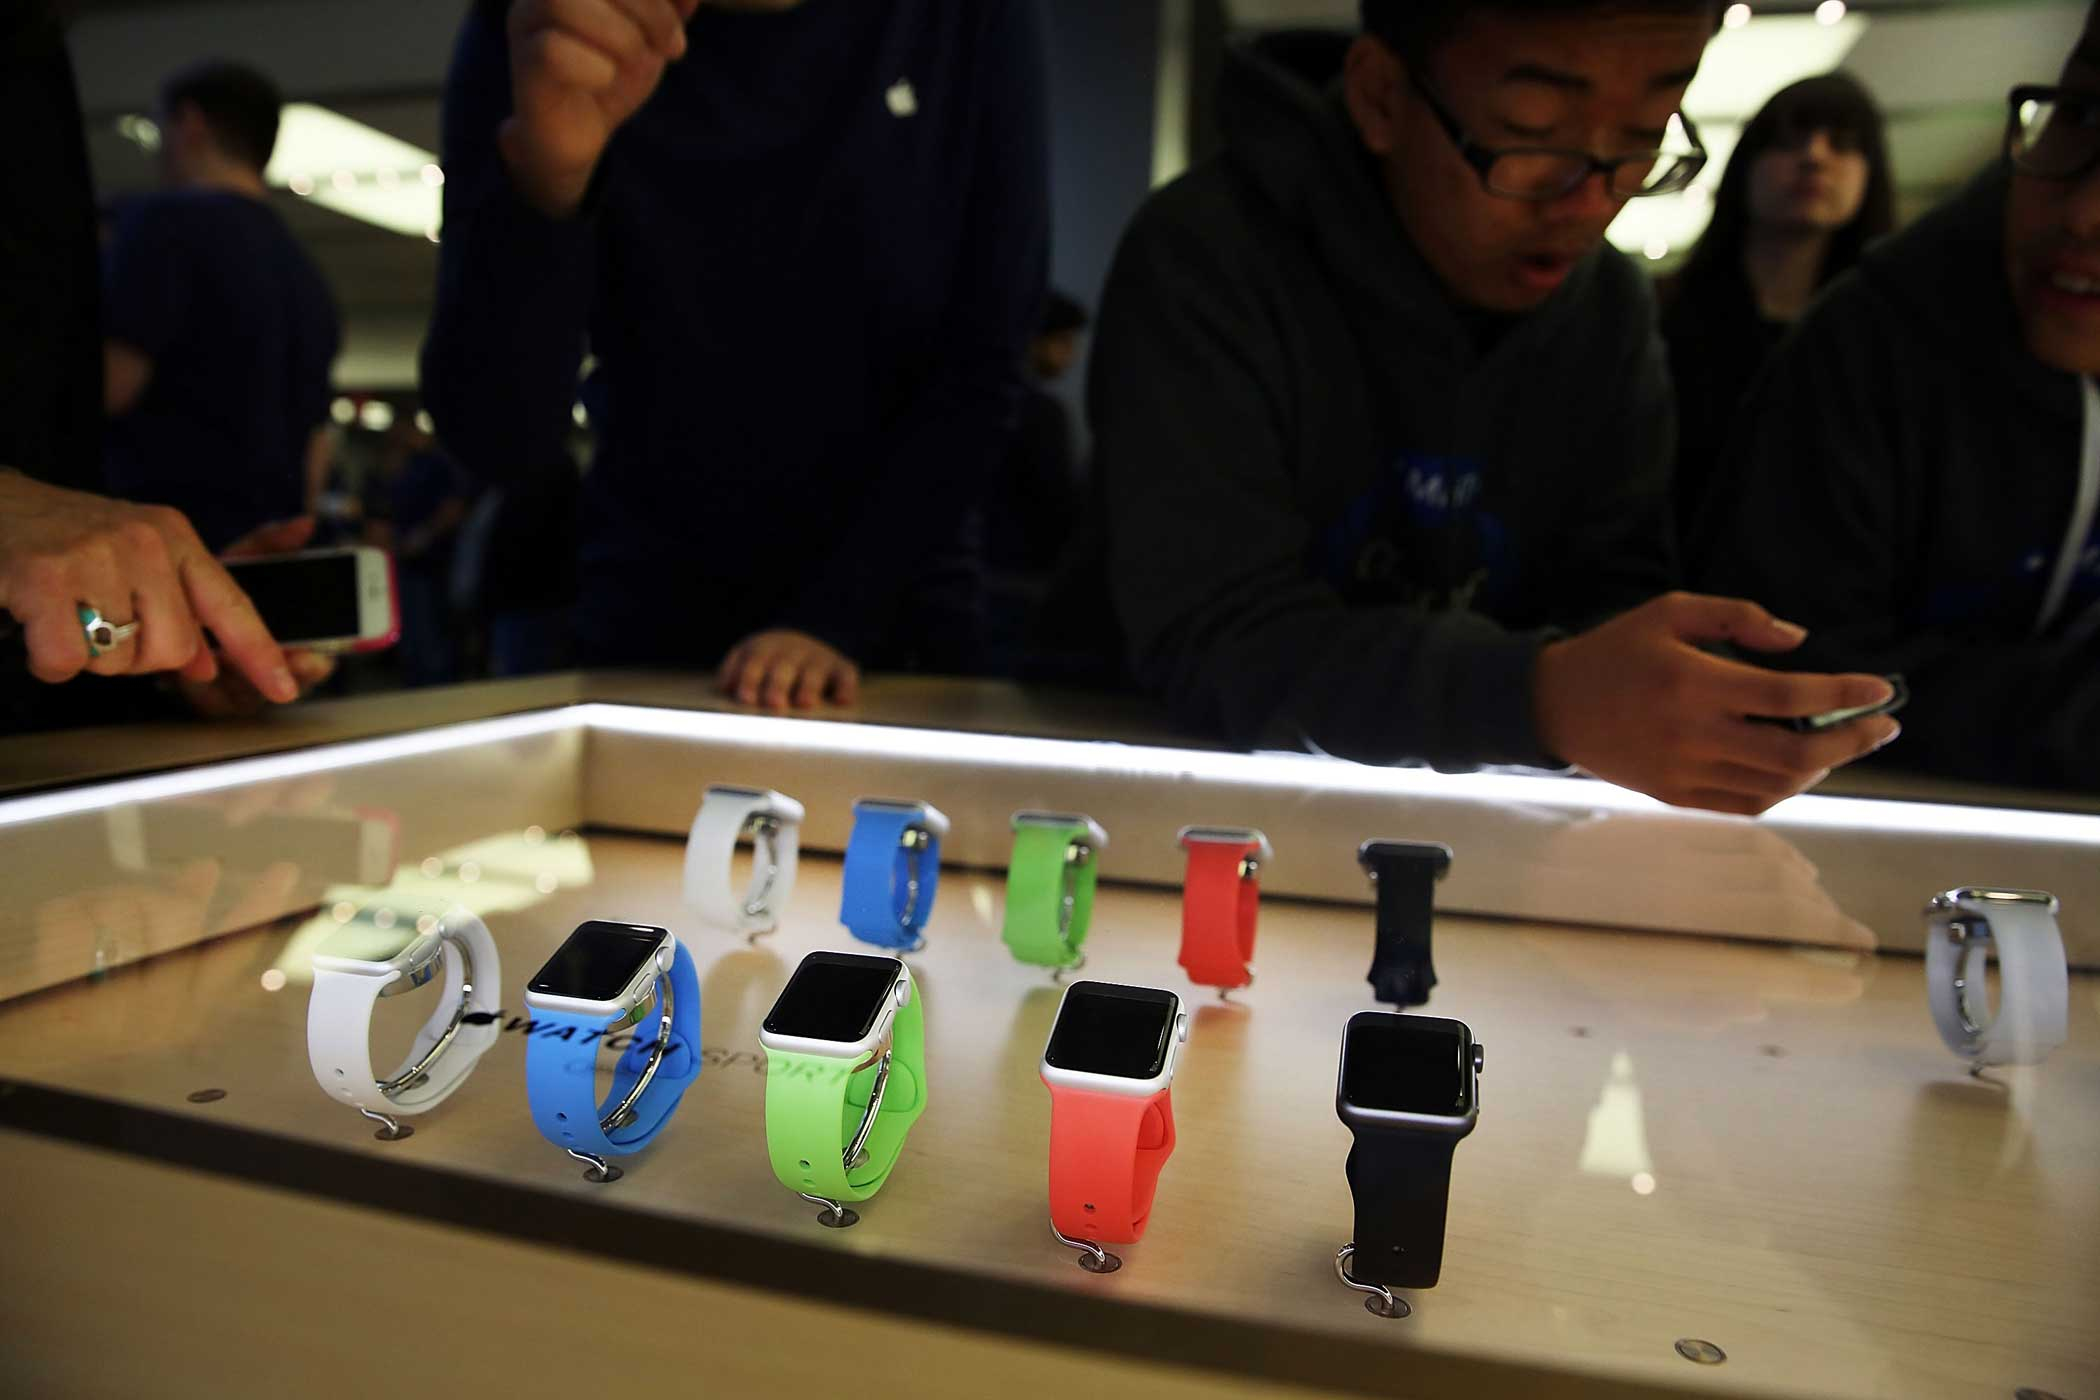 Apple Store Apple Watches in the 5th Avenue Apple Store in New York.